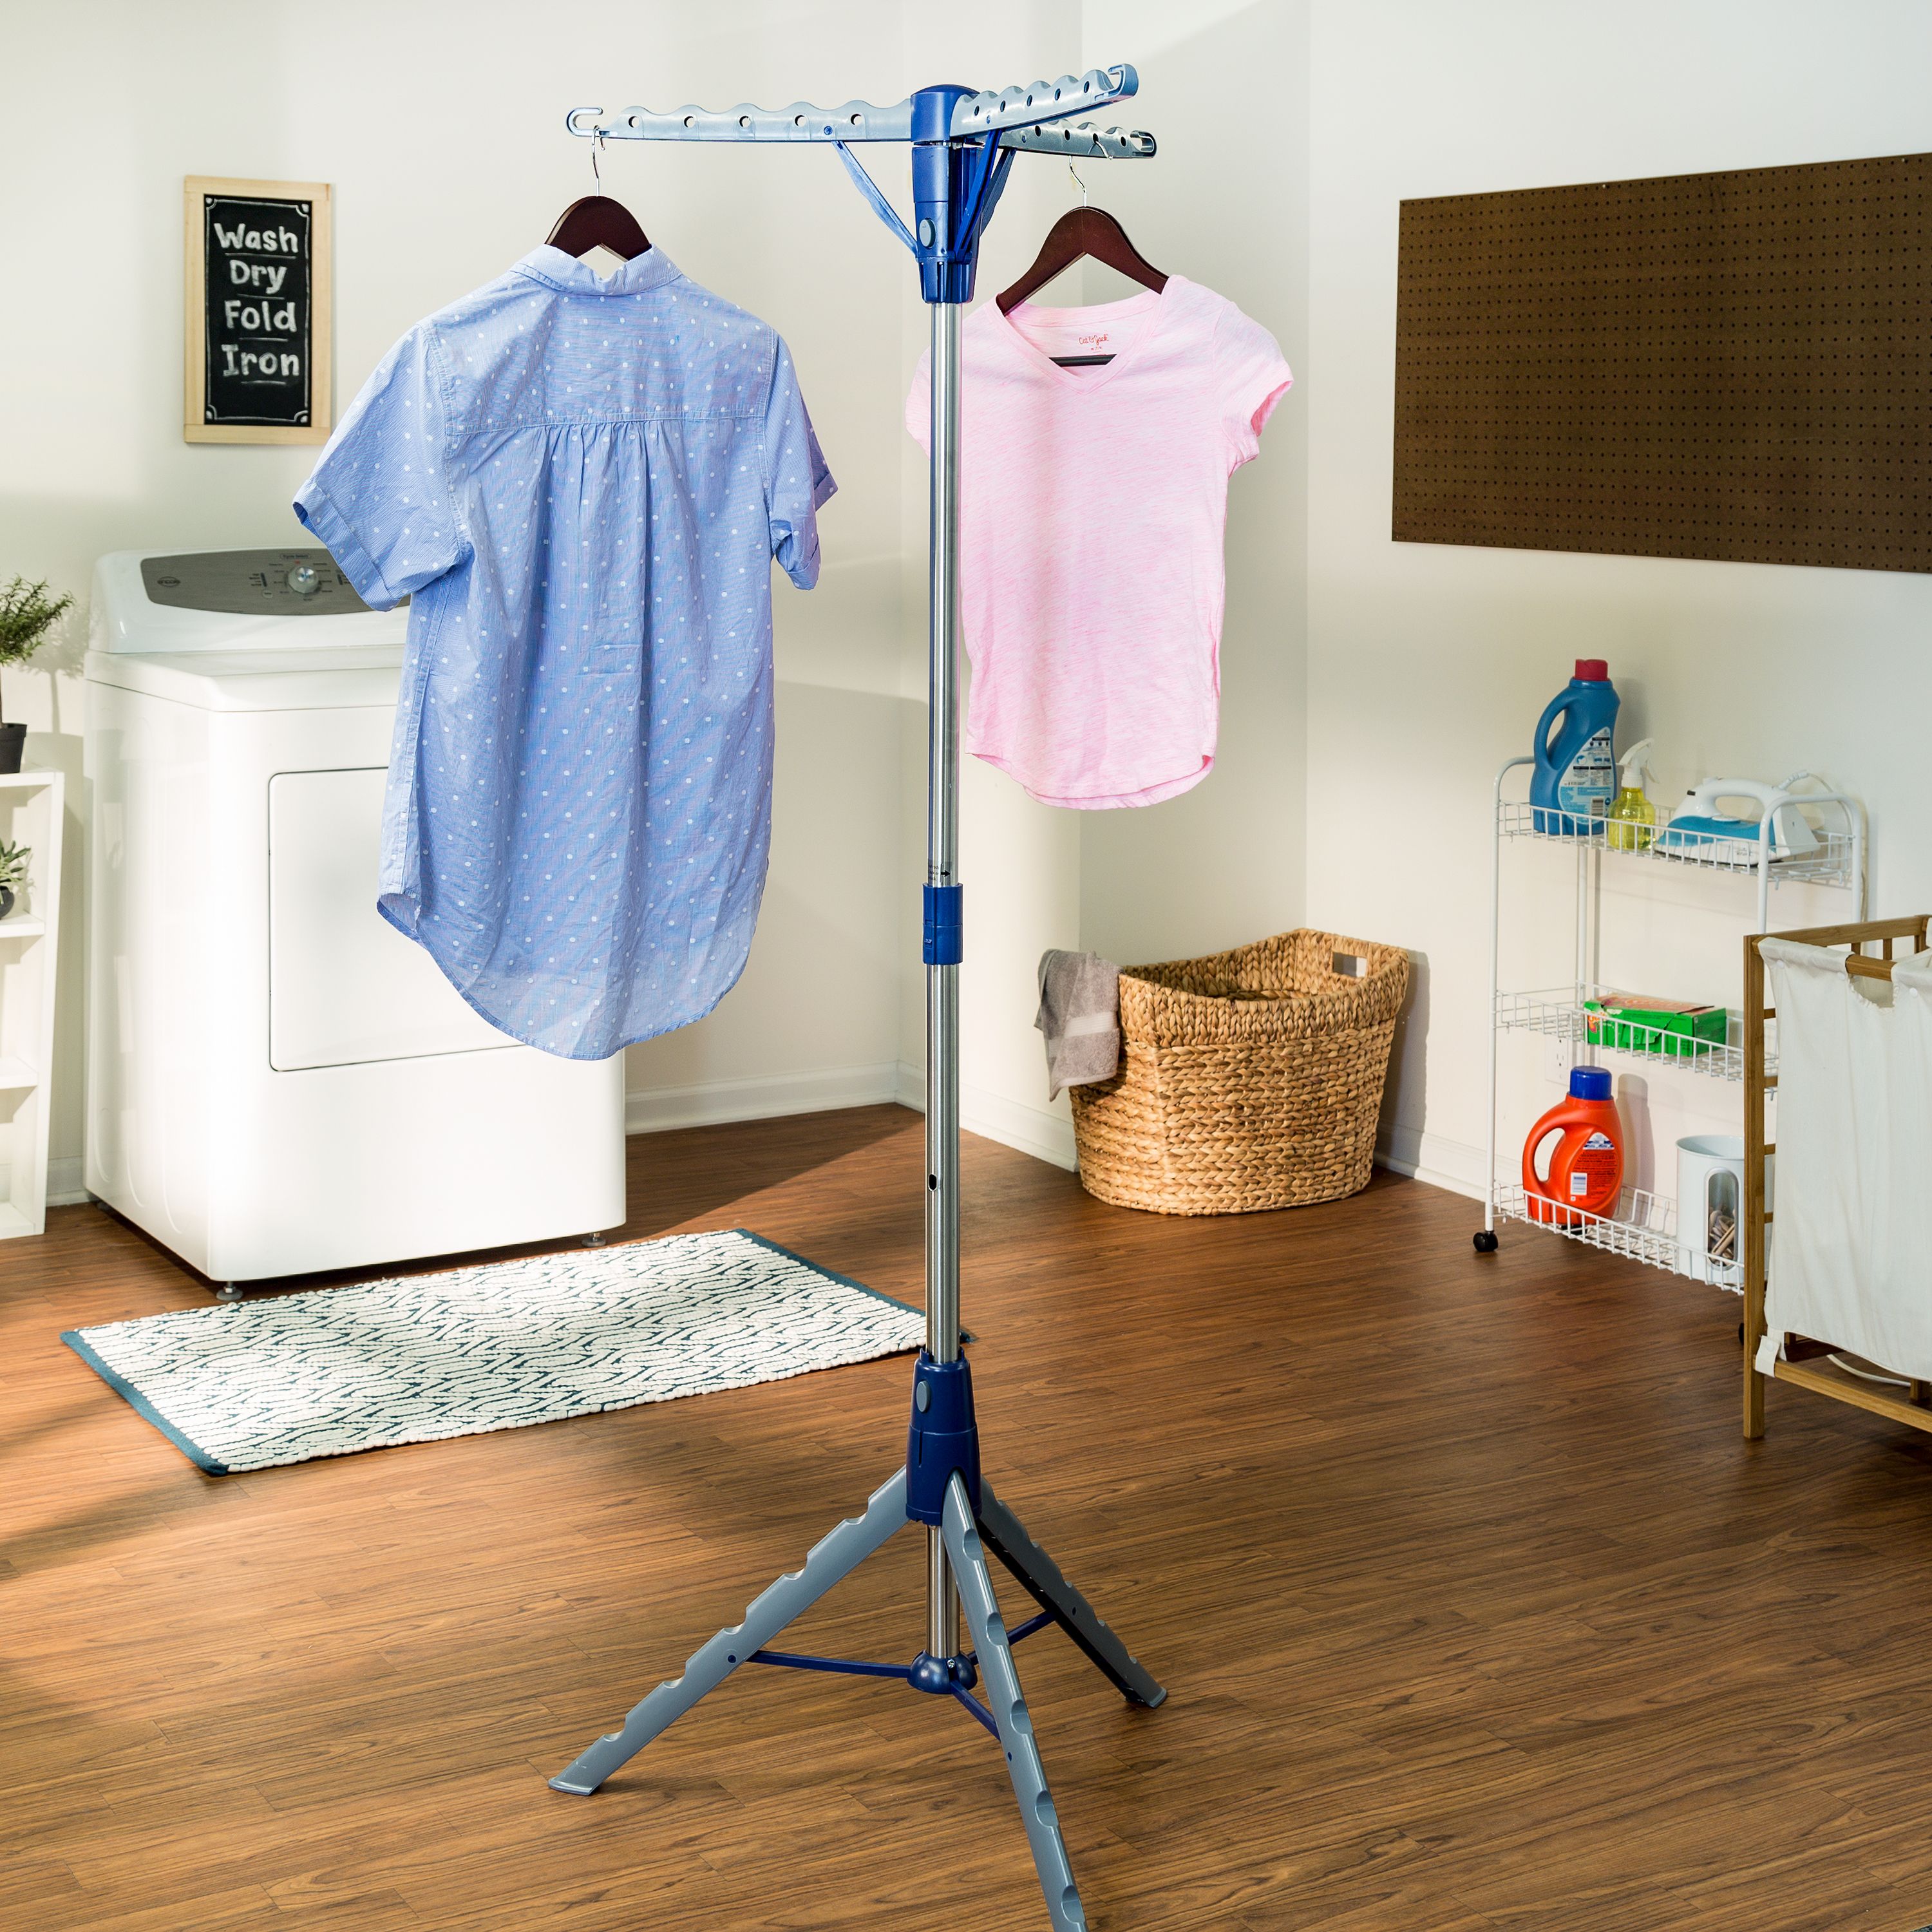 Honey-Can-Do Collapsible Steel Freestanding Tripod Clothes Drying Rack, Chrome/Blue - image 1 of 5